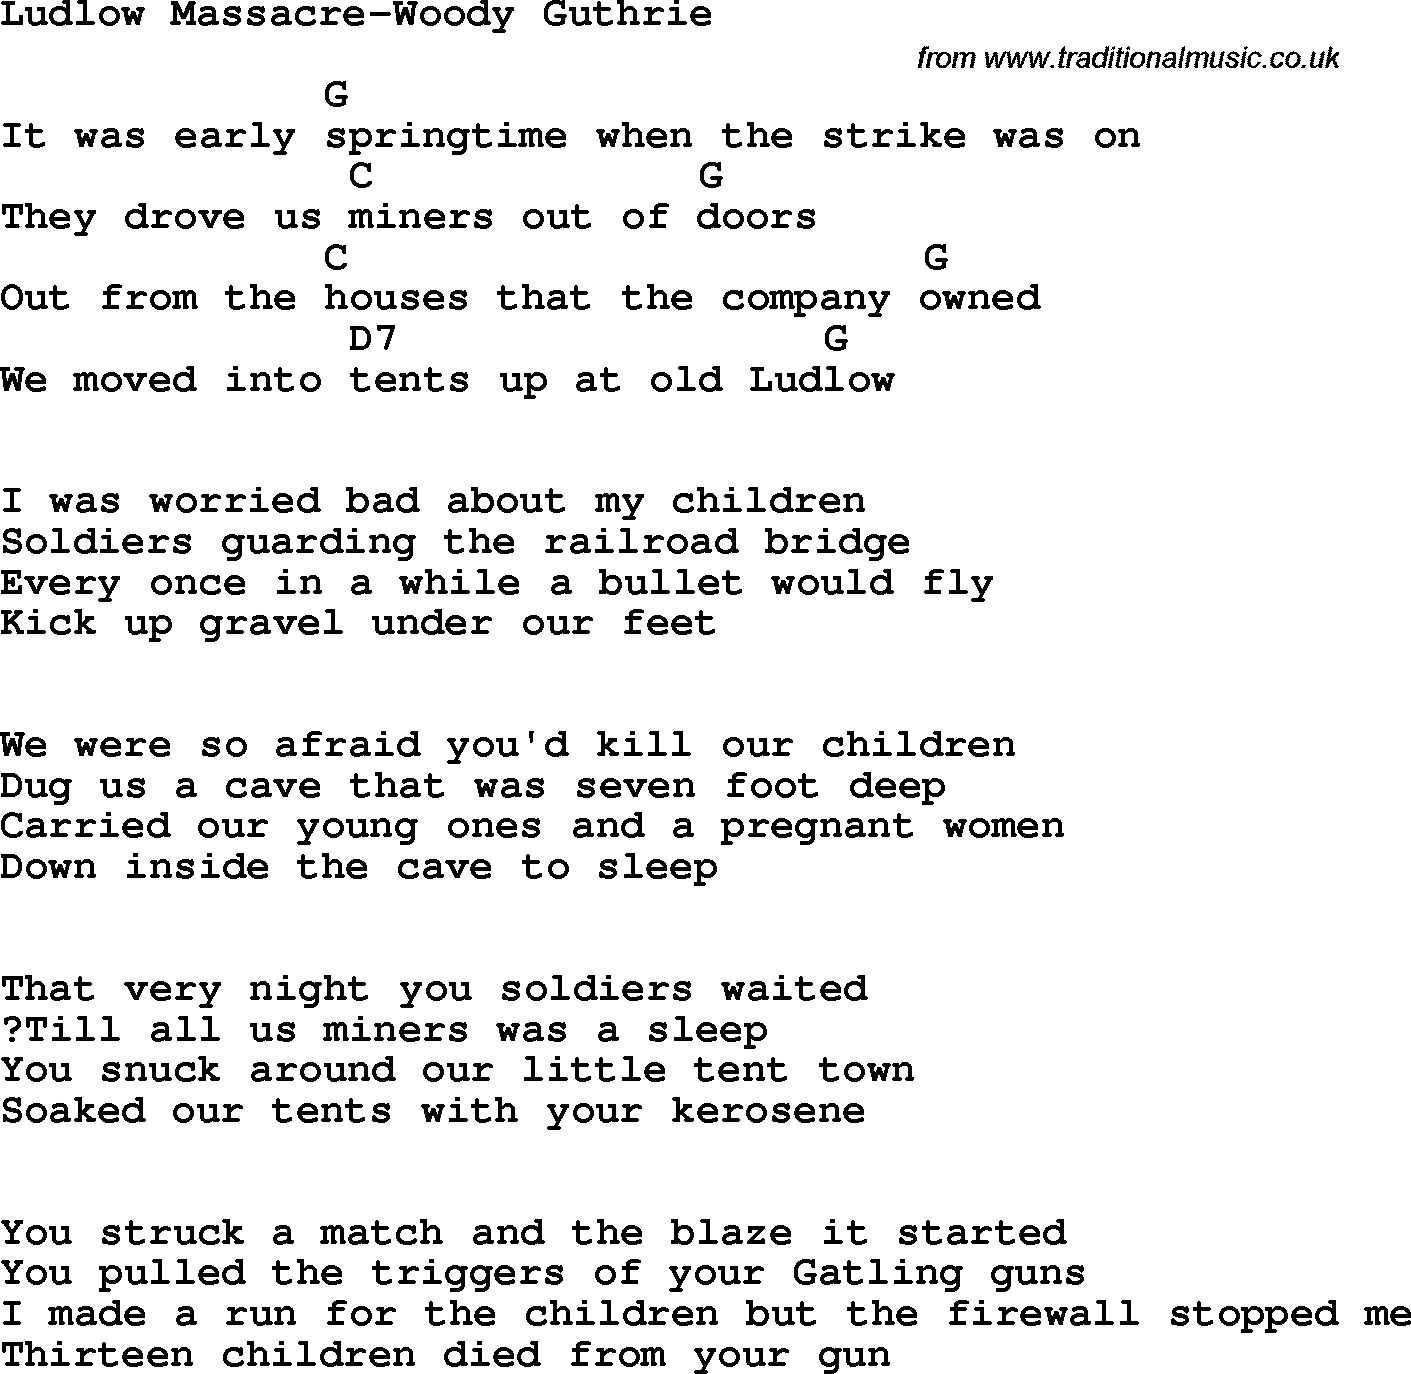 Protest Song Ludlow Massacre-Woody Guthrie lyrics and chords